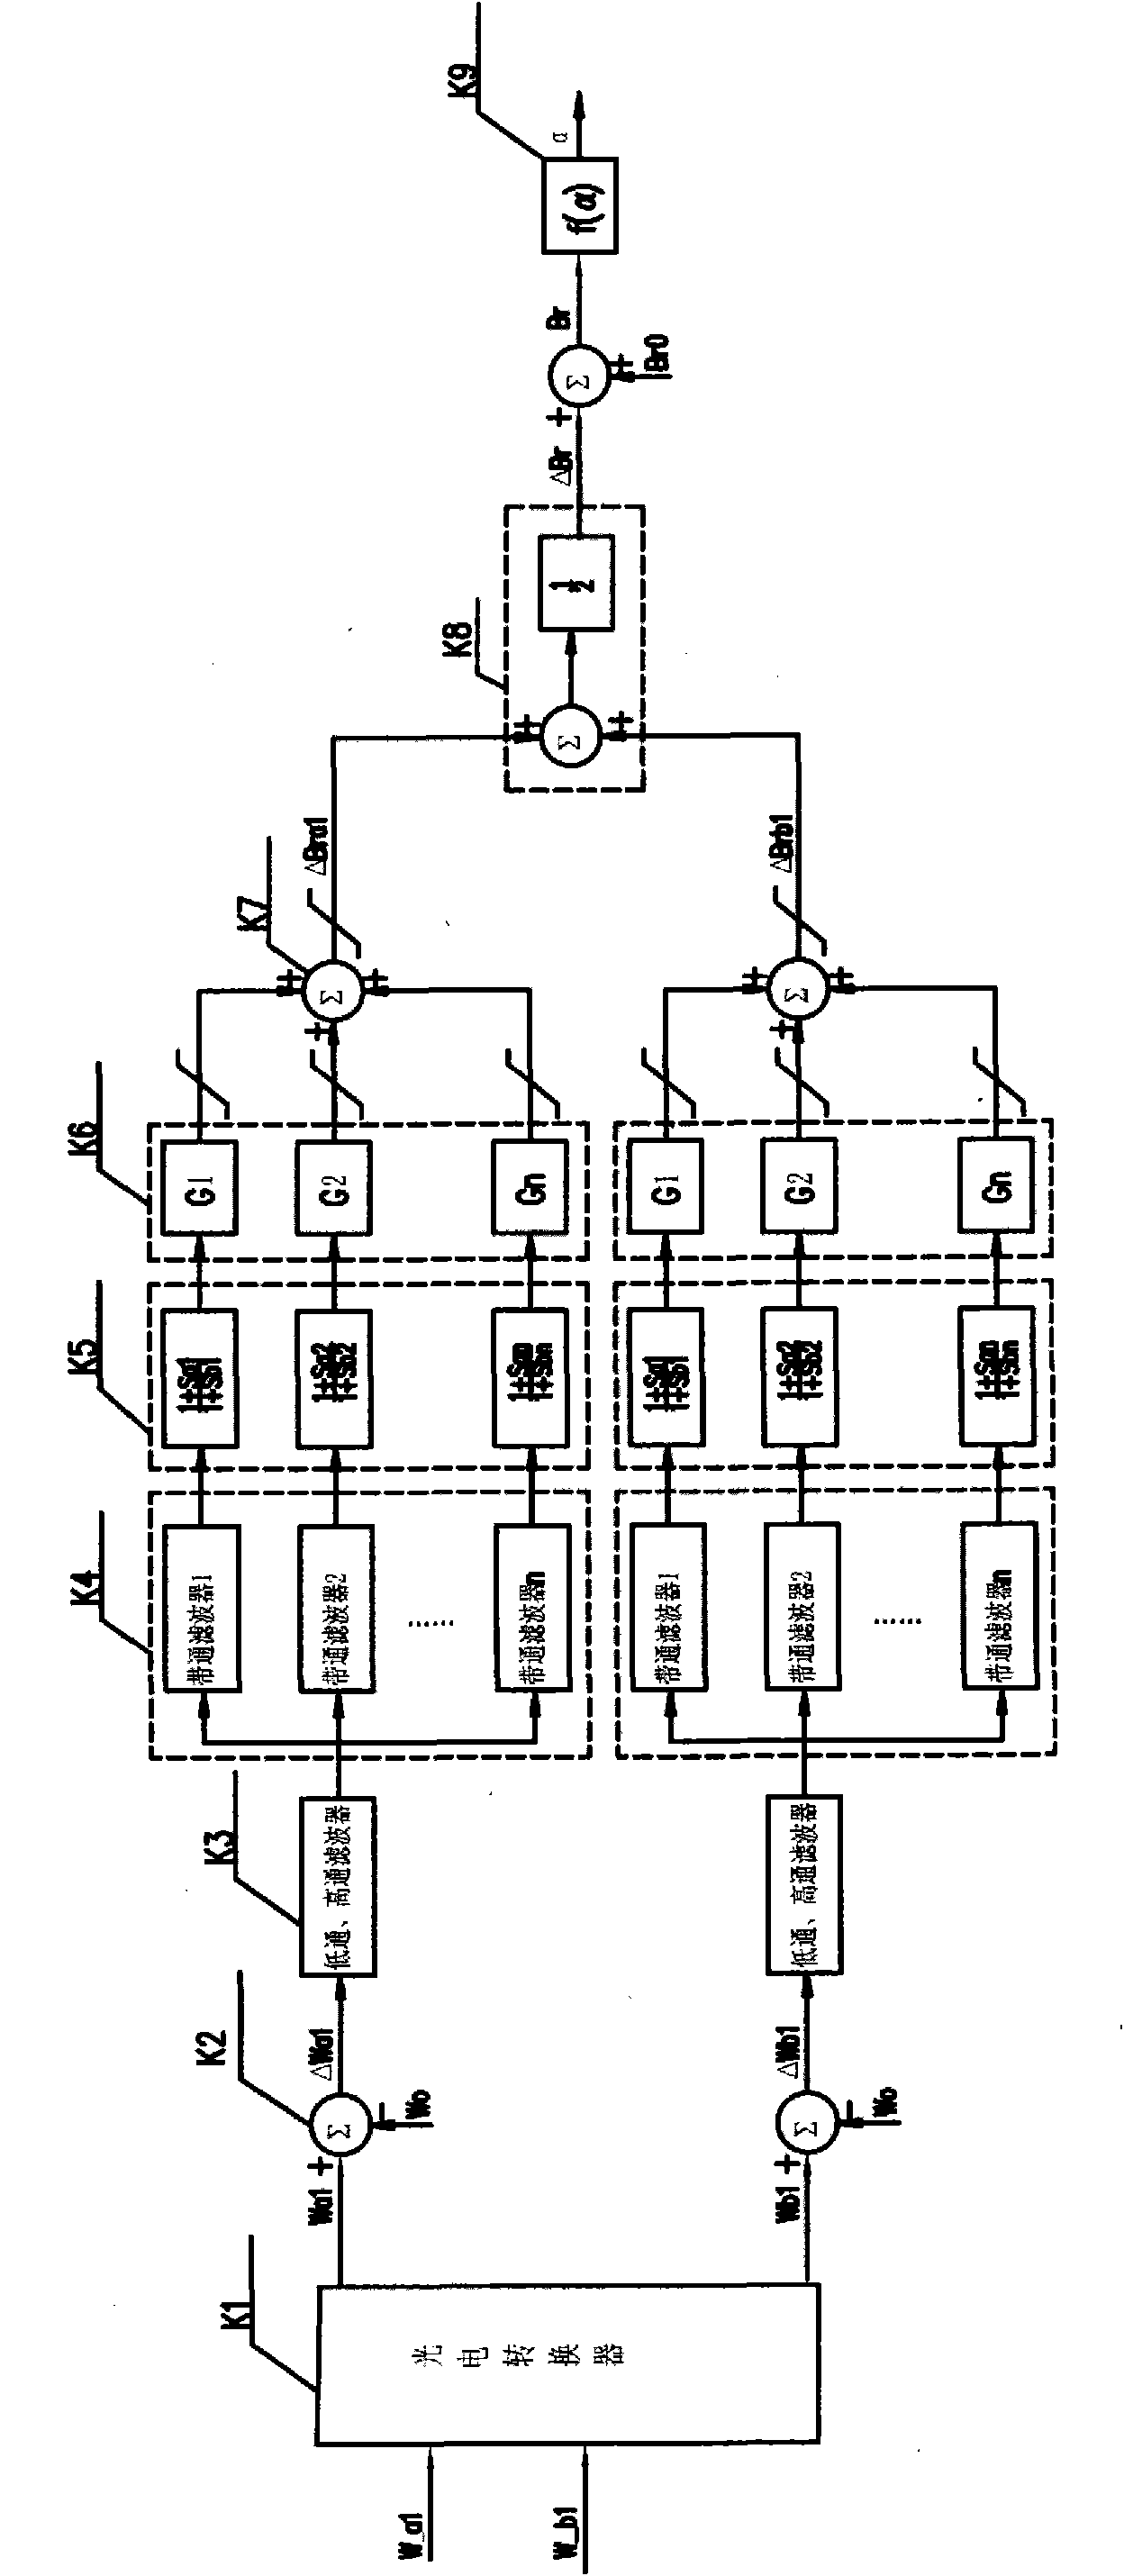 Control device and method for suppressing subsynchronous oscillation